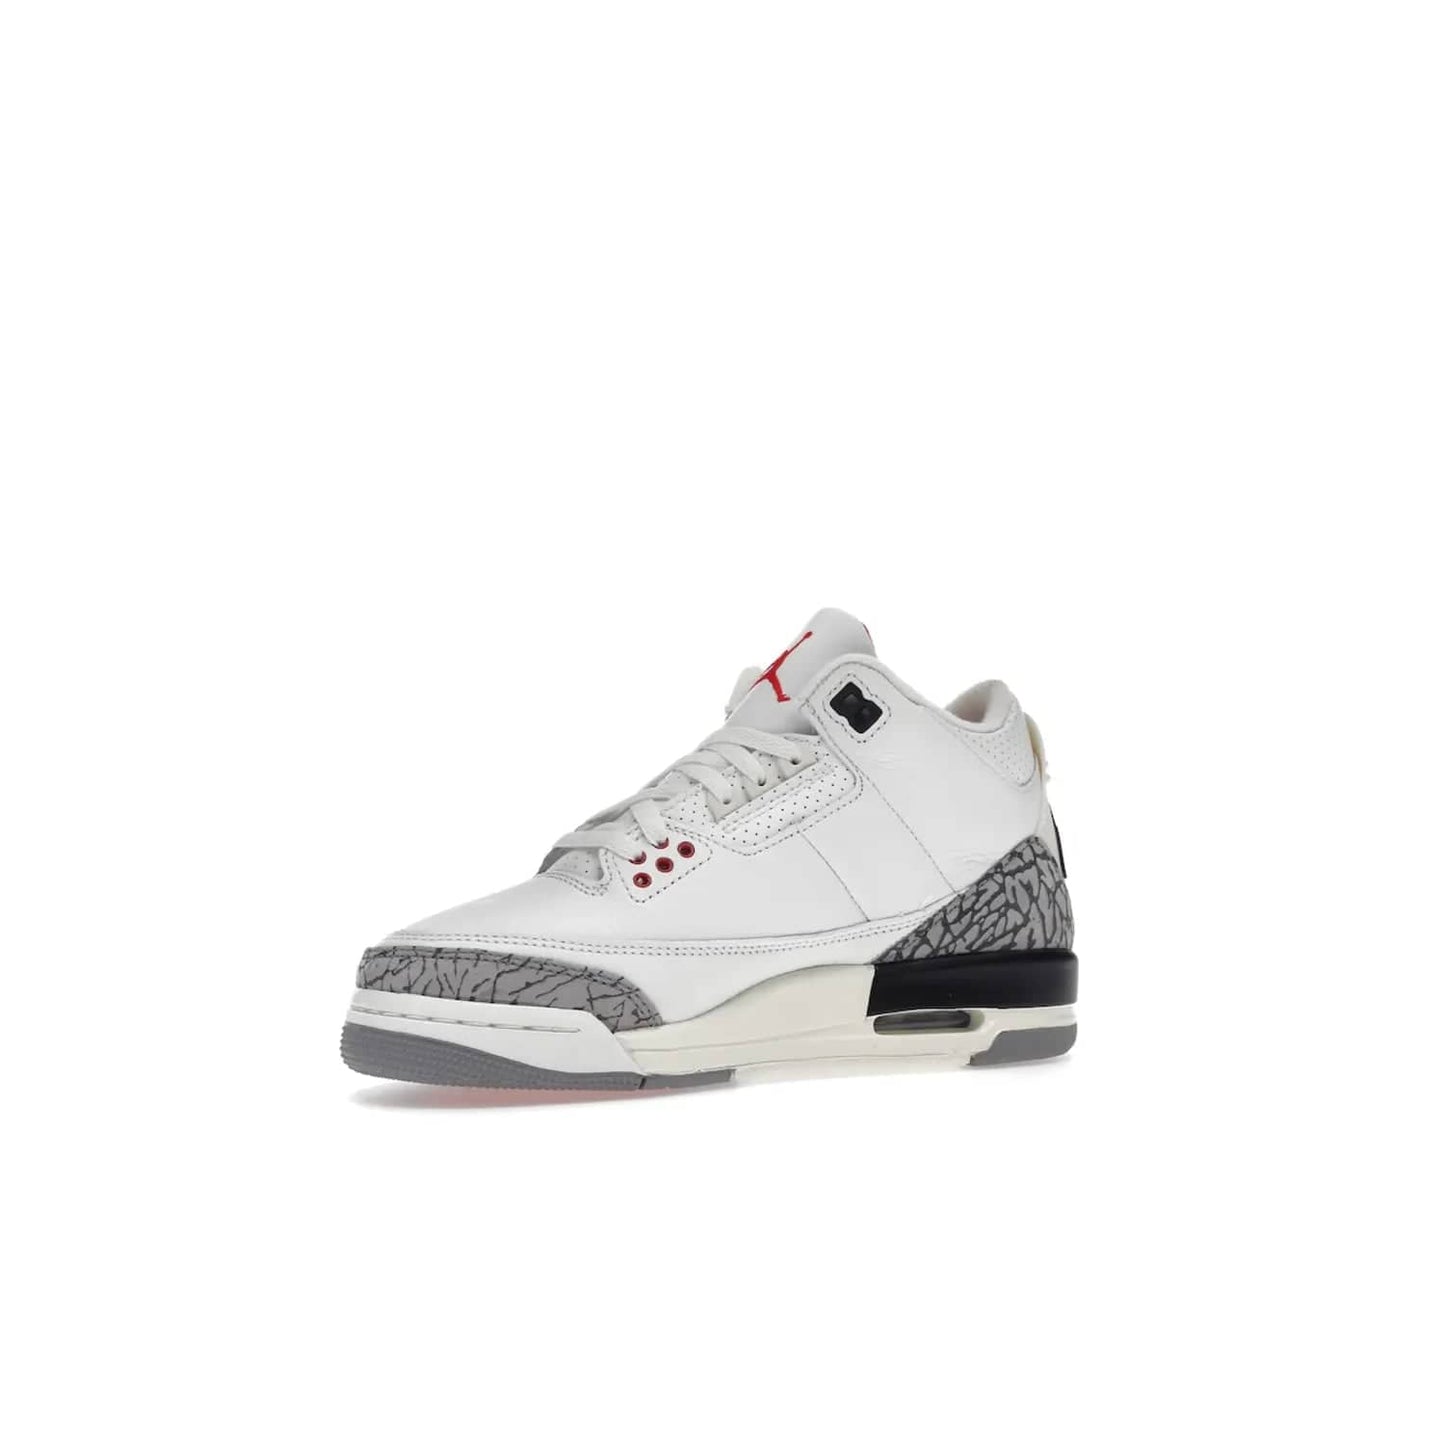 Jordan 3 Retro White Cement Reimagined (GS) - Image 16 - Only at www.BallersClubKickz.com - Grab the perfect blend of modern design and classic style with the Jordan 3 Retro White Cement Reimagined (GS). Features Summit White, Fire Red, Black, and Cement Grey colorway, iconic Jordan logo embroidered on the tongue, and “Nike Air” branding. Limited availability, get your pair before March 11th 2023.